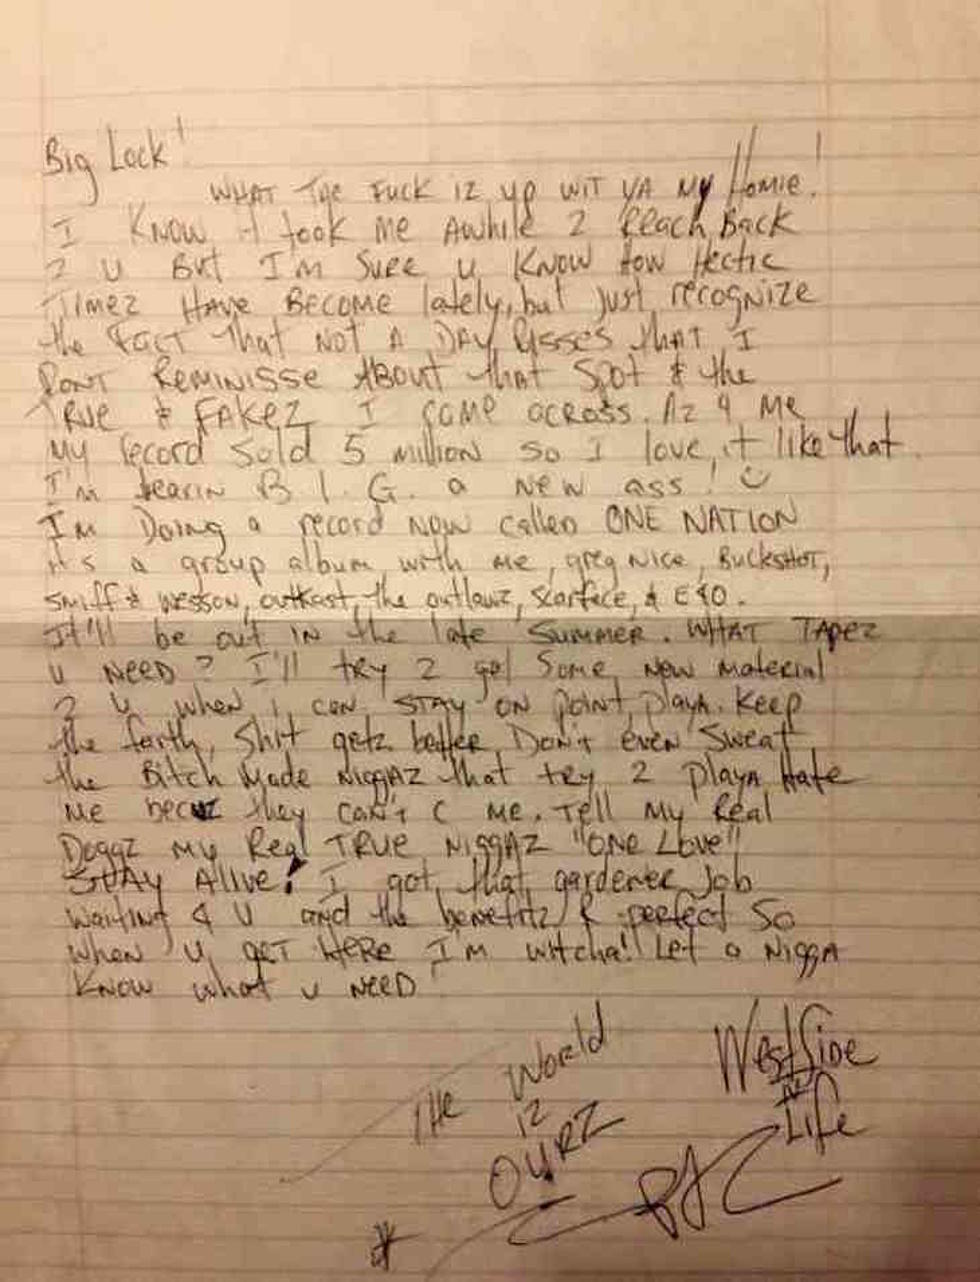 Tupac Shakur’s Newly Found Handwritten Letters Reveal He Wanted To Unify The East And West Coast